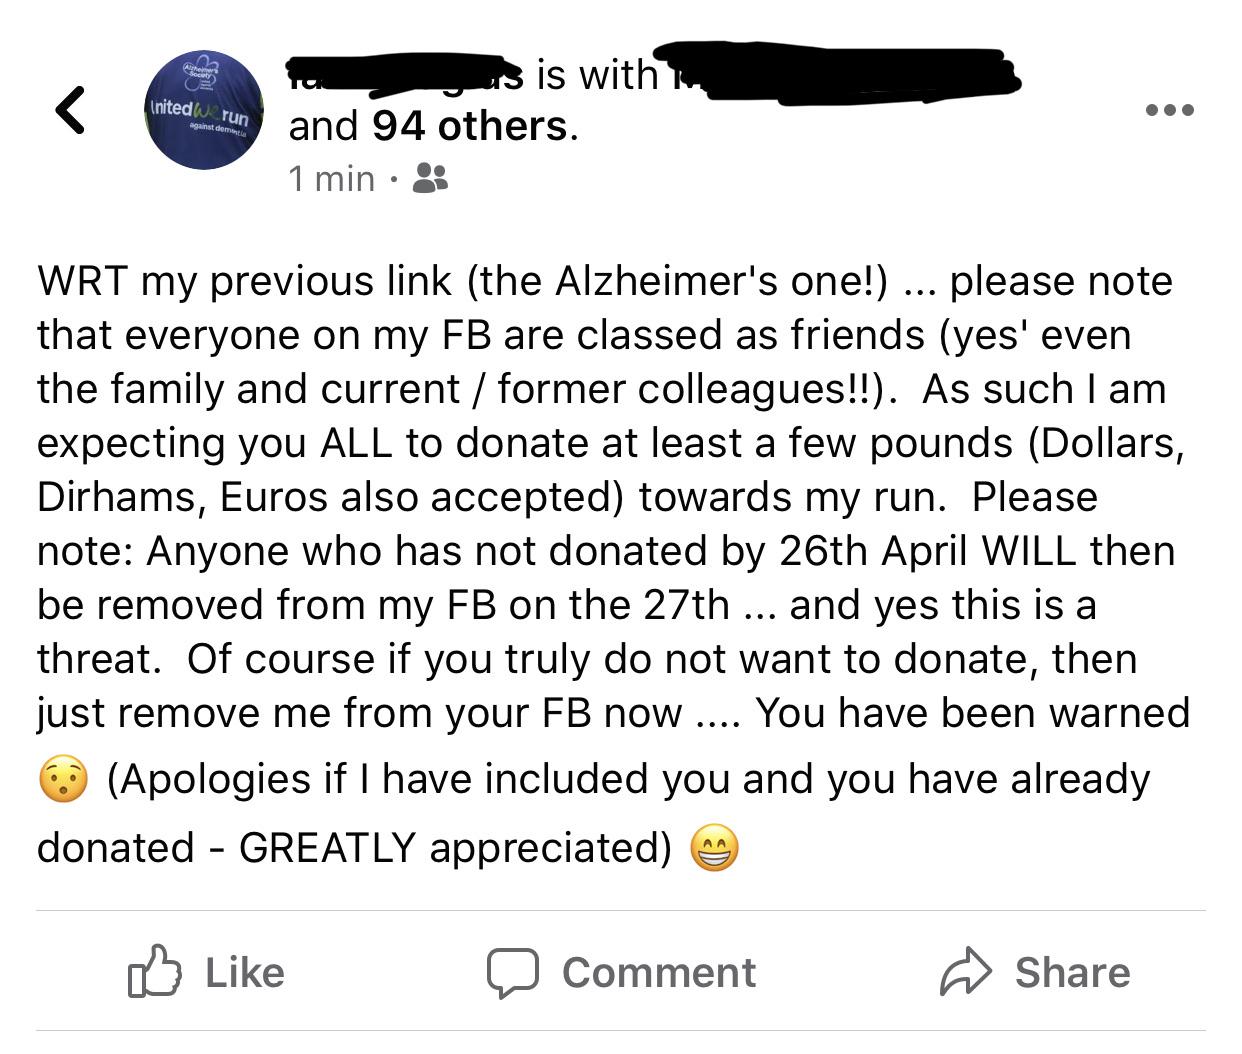 angle - Inited run against dementia us is with and 94 others. 1 min Wrt my previous link the Alzheimer's one! ... please note that everyone on my Fb are classed as friends yes' even the family and current former colleagues!!. As such I am expecting you Al